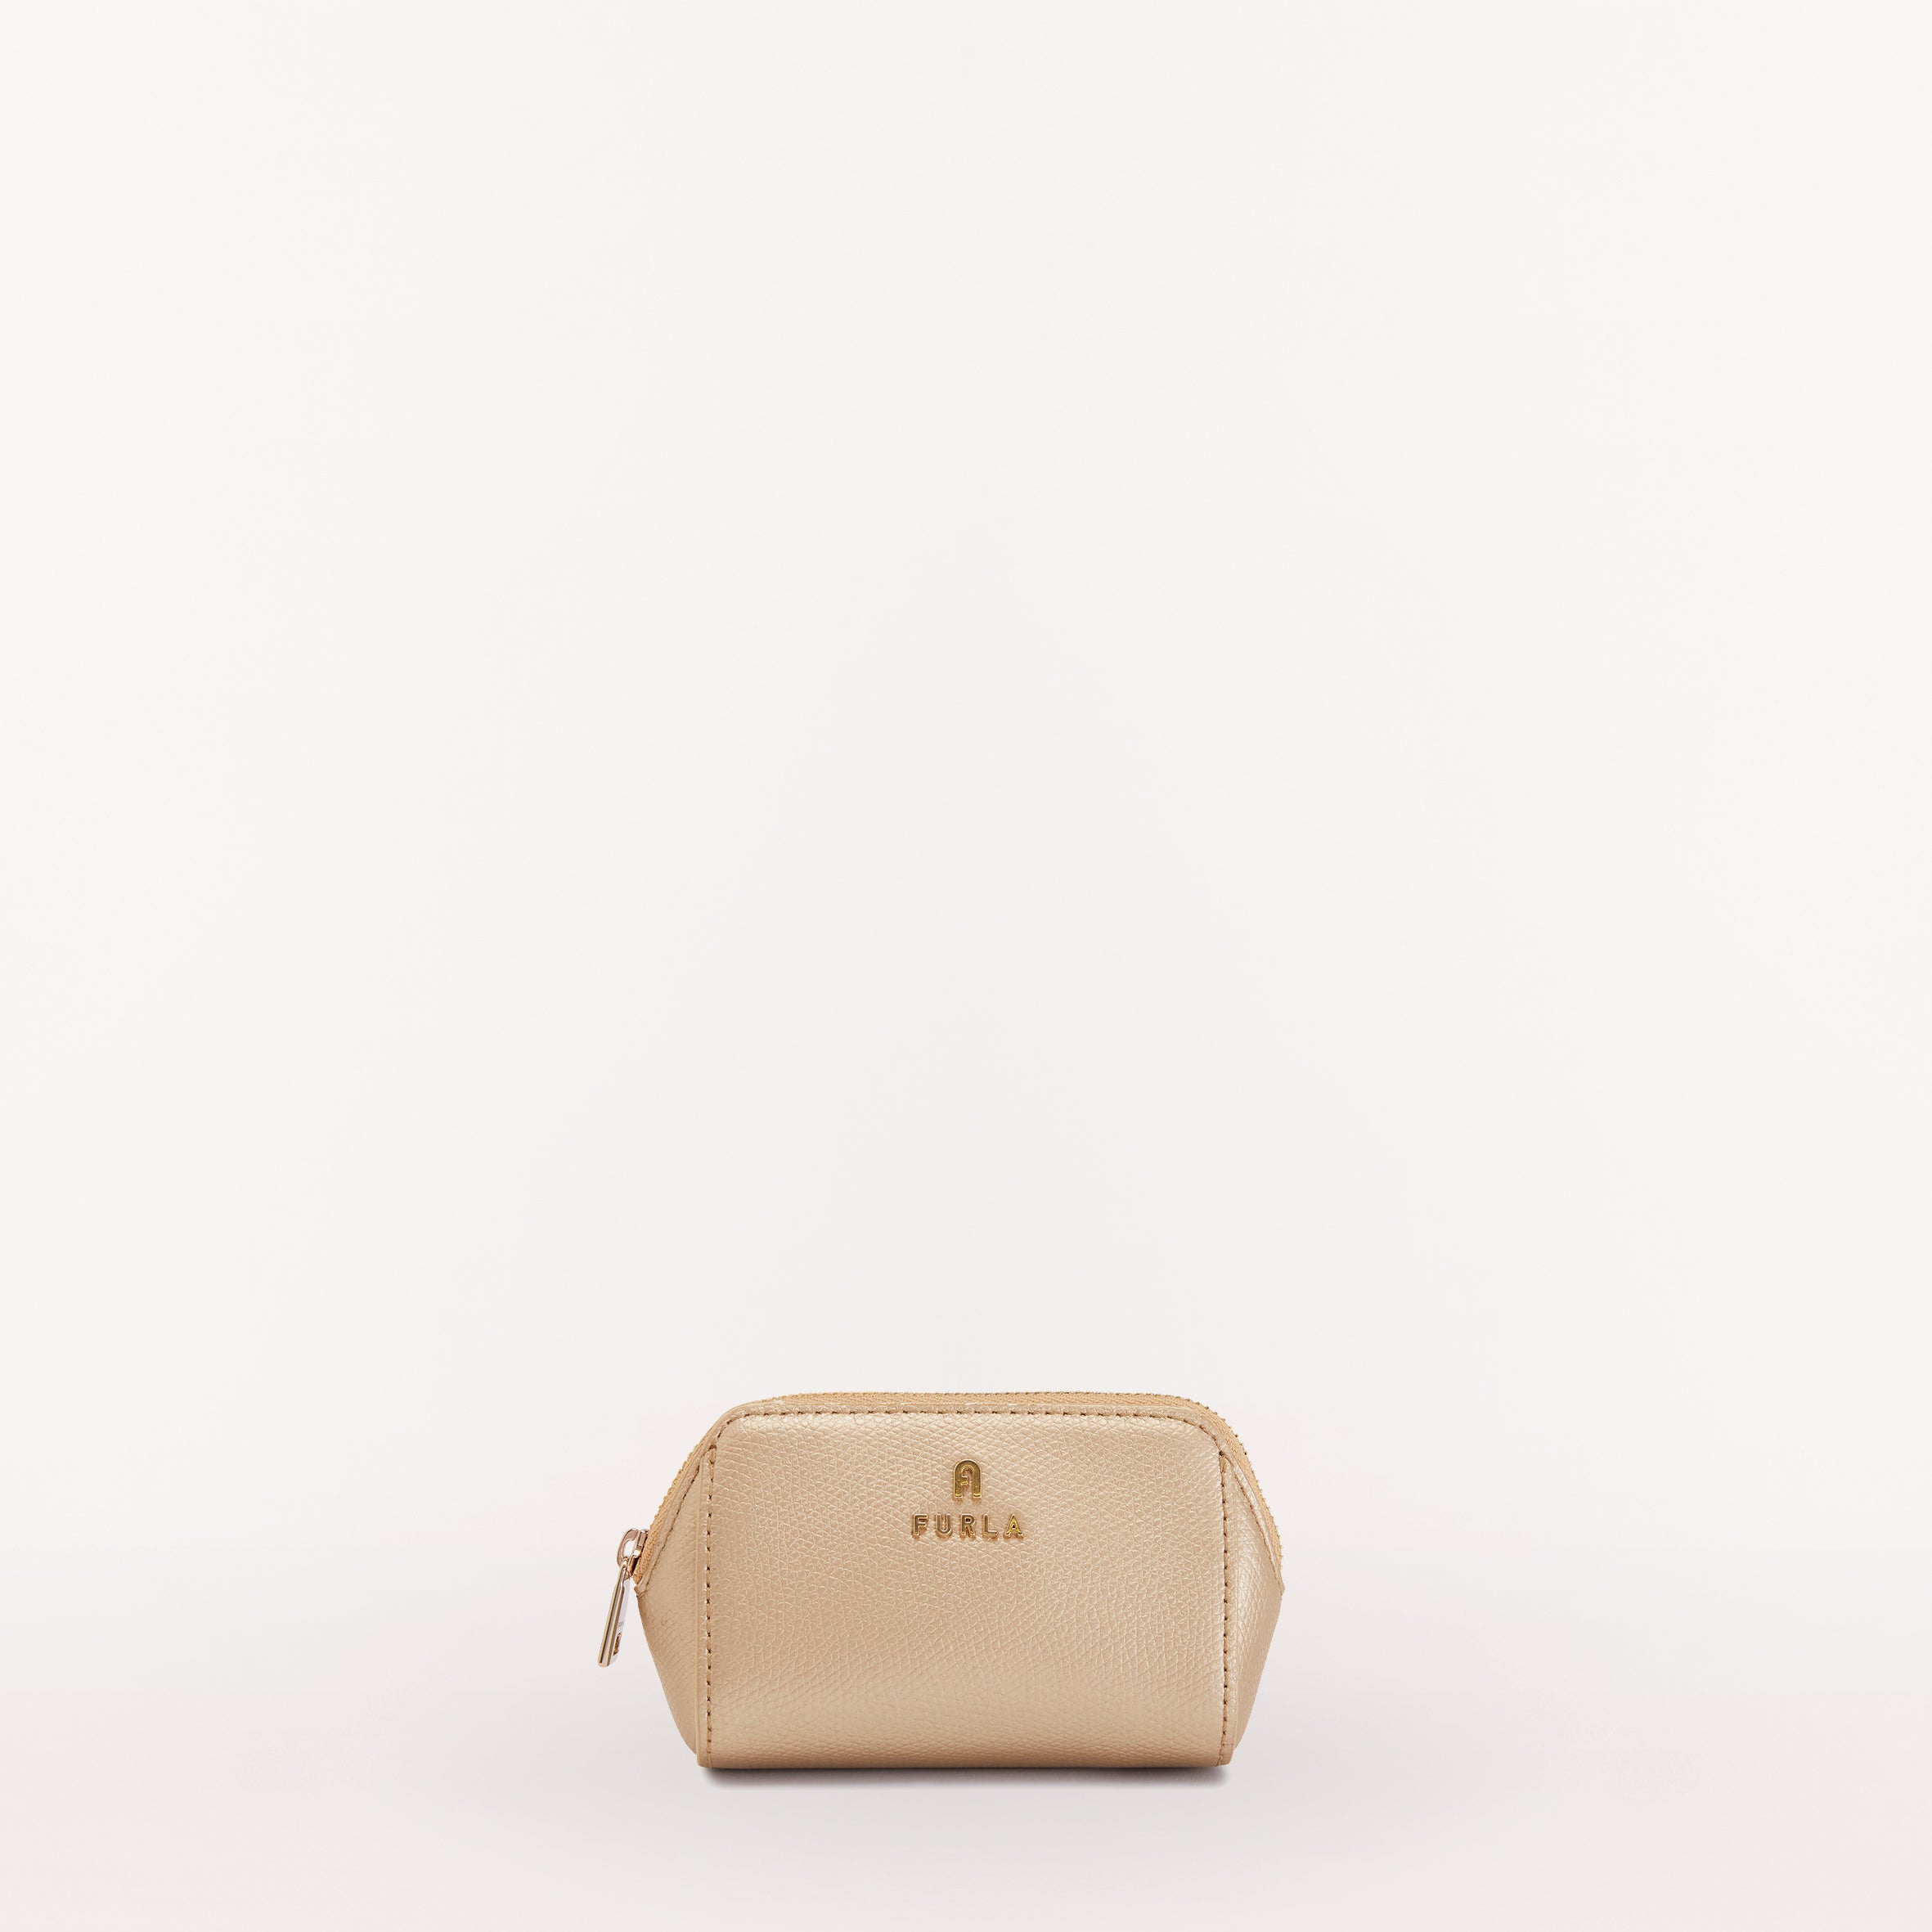 Furla Camelia Cosmetic Case, Champagne, Ares Metal